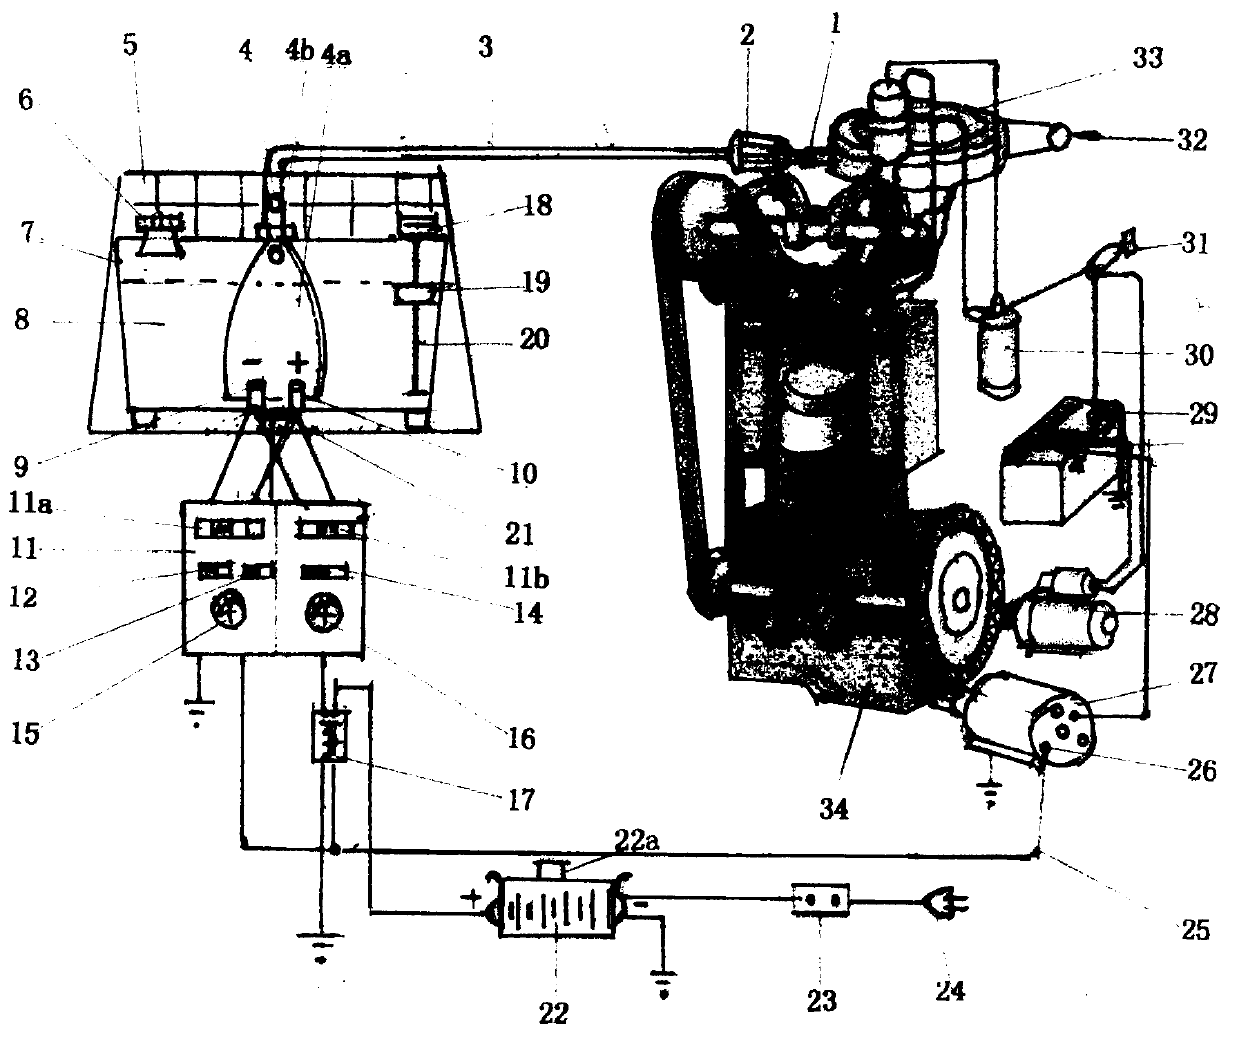 Hydrogen-oxygen-assisted independent combustion device of internal combustion engine